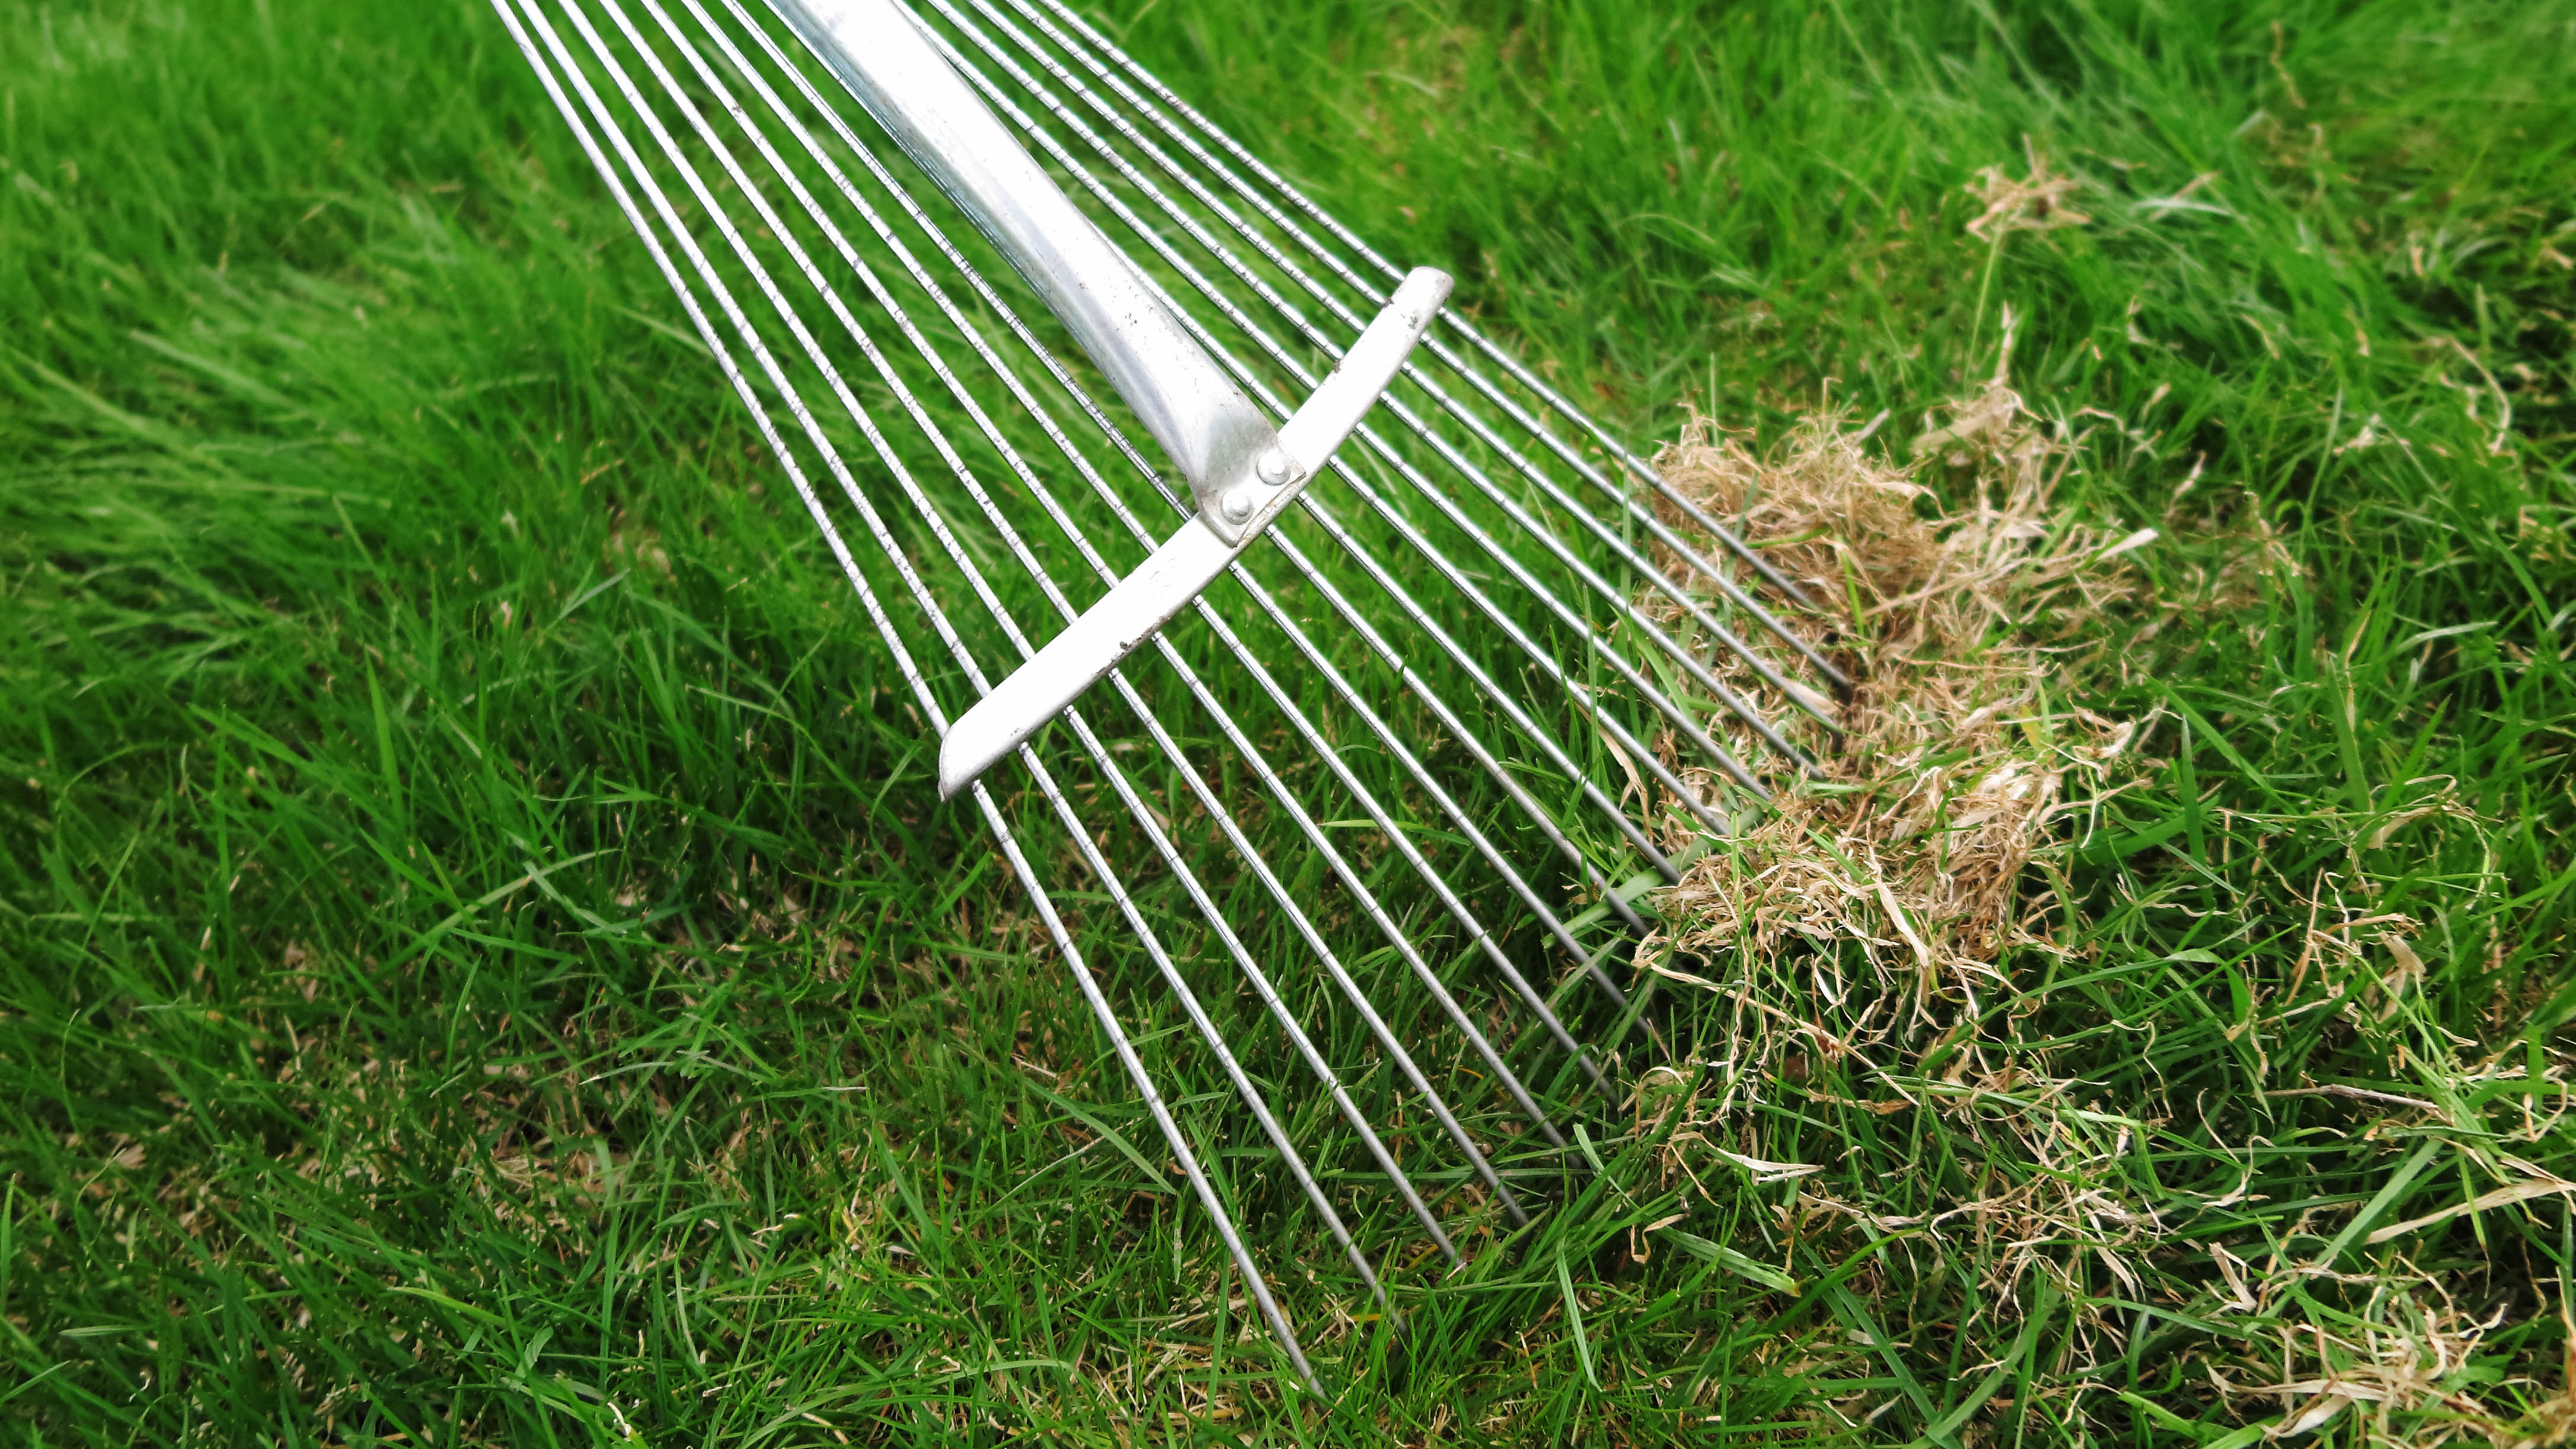 7 signs your lawn needs aerating | Tom's Guide